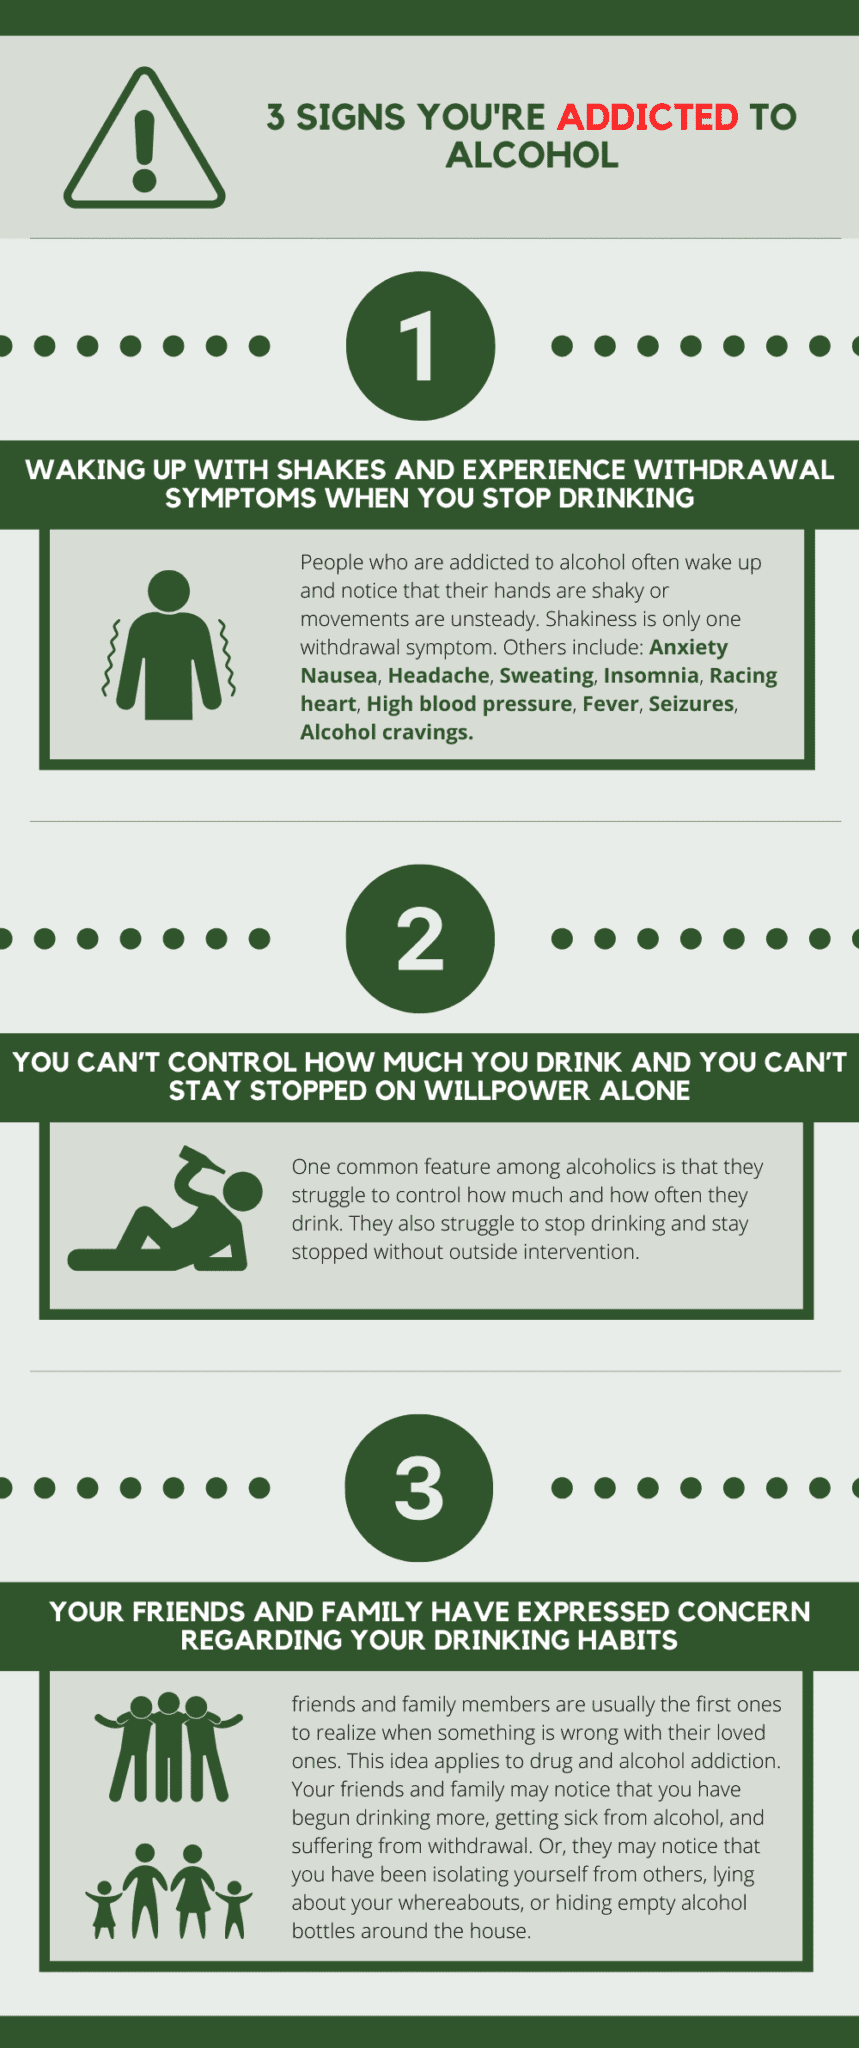 3 signs you're addicted to alcohol